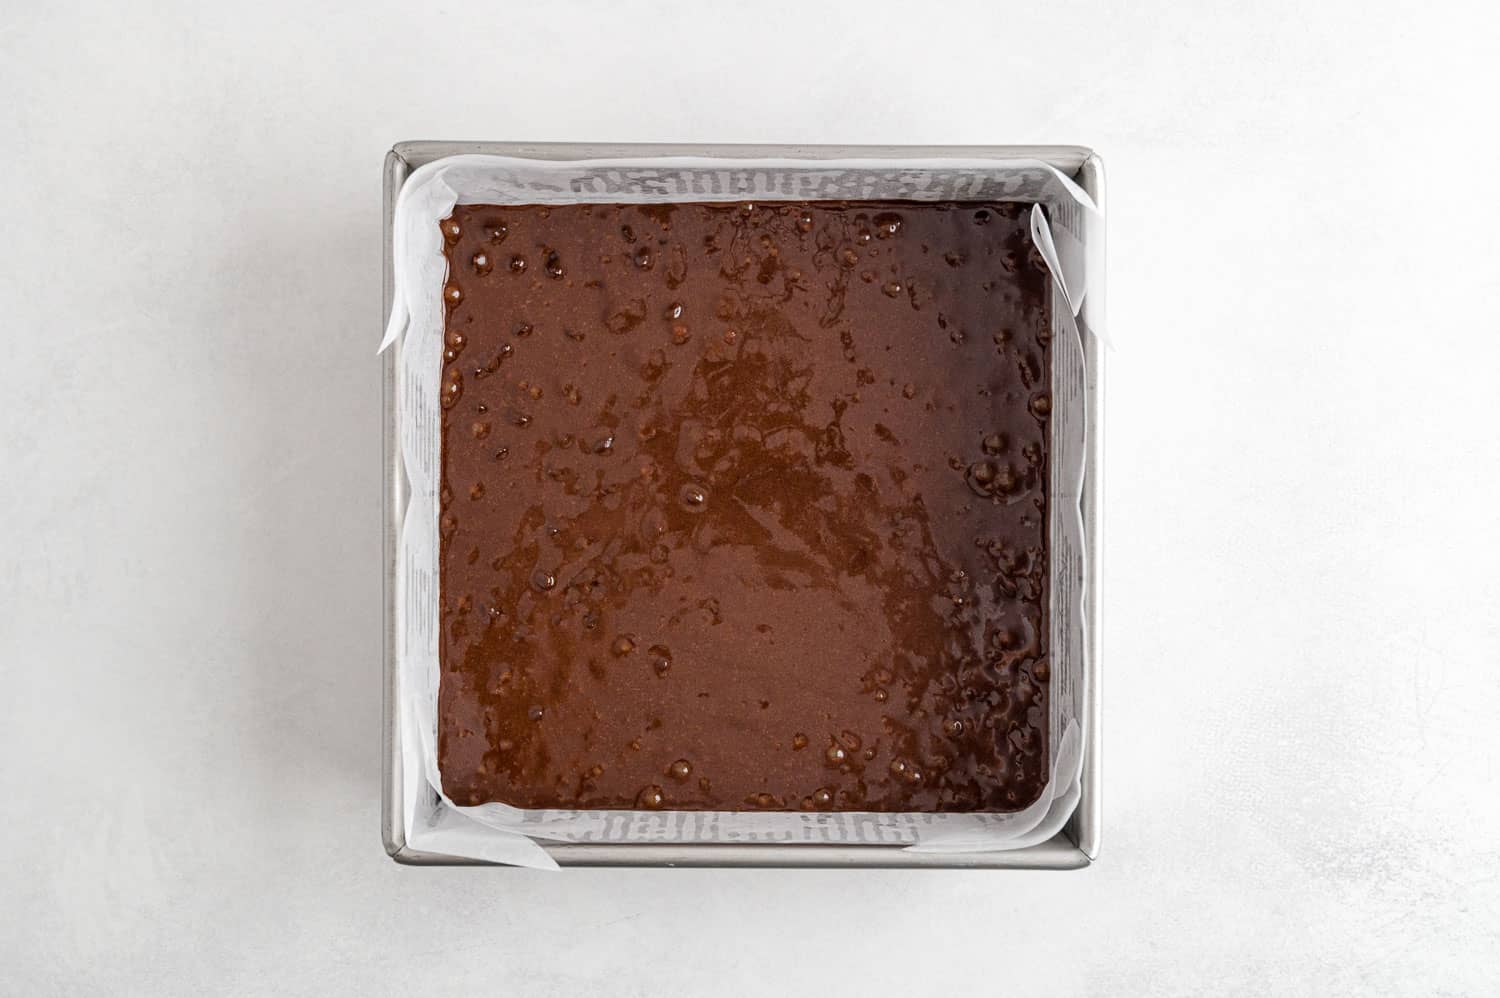 Unbaked brownies in a square dish.